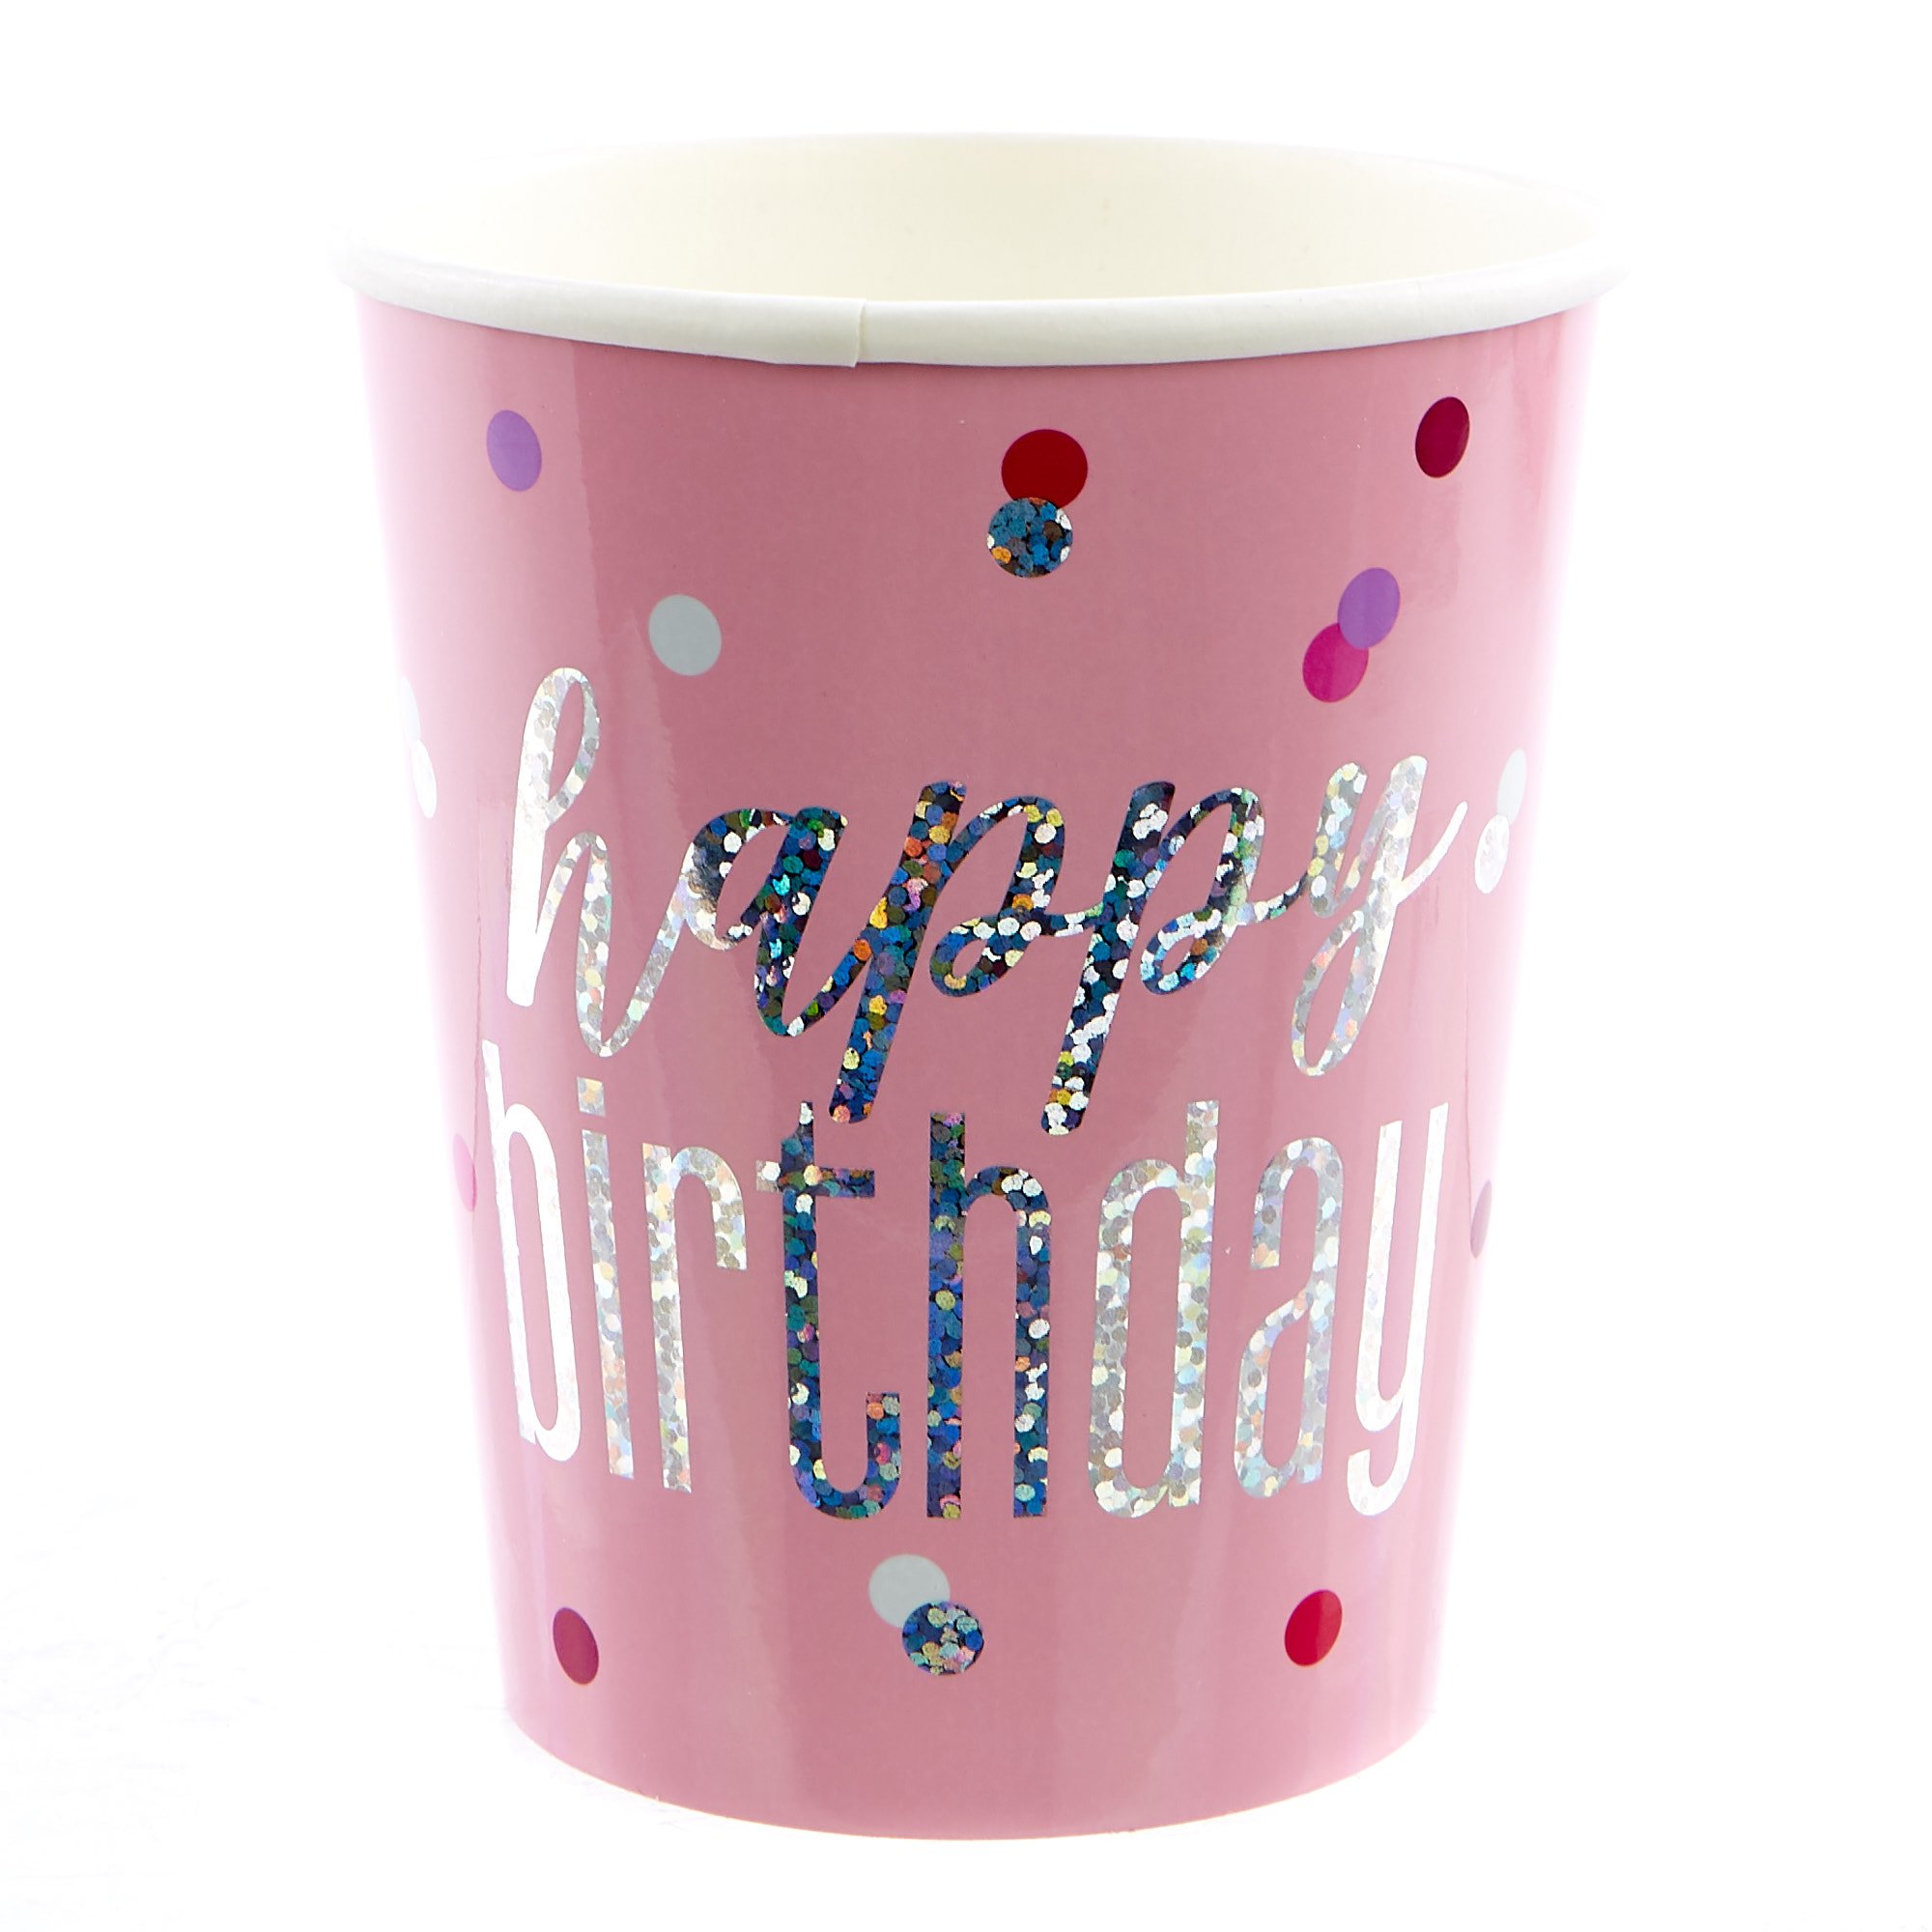 Pink Happy Birthday Party Tableware & Decorations Bundle - 16 Guests